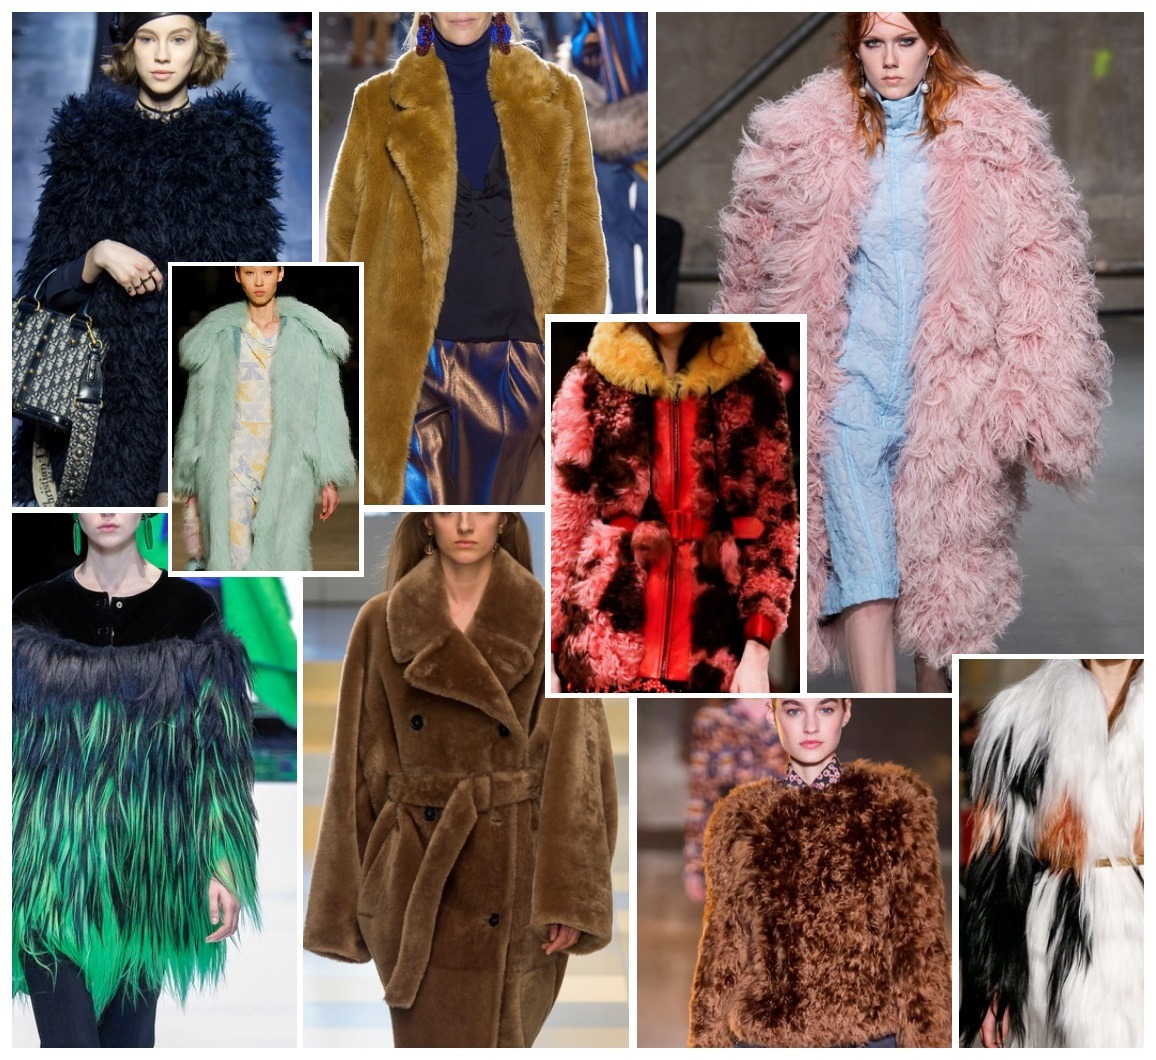 Both Real and Faux Fur Production Cause Environmental Issues